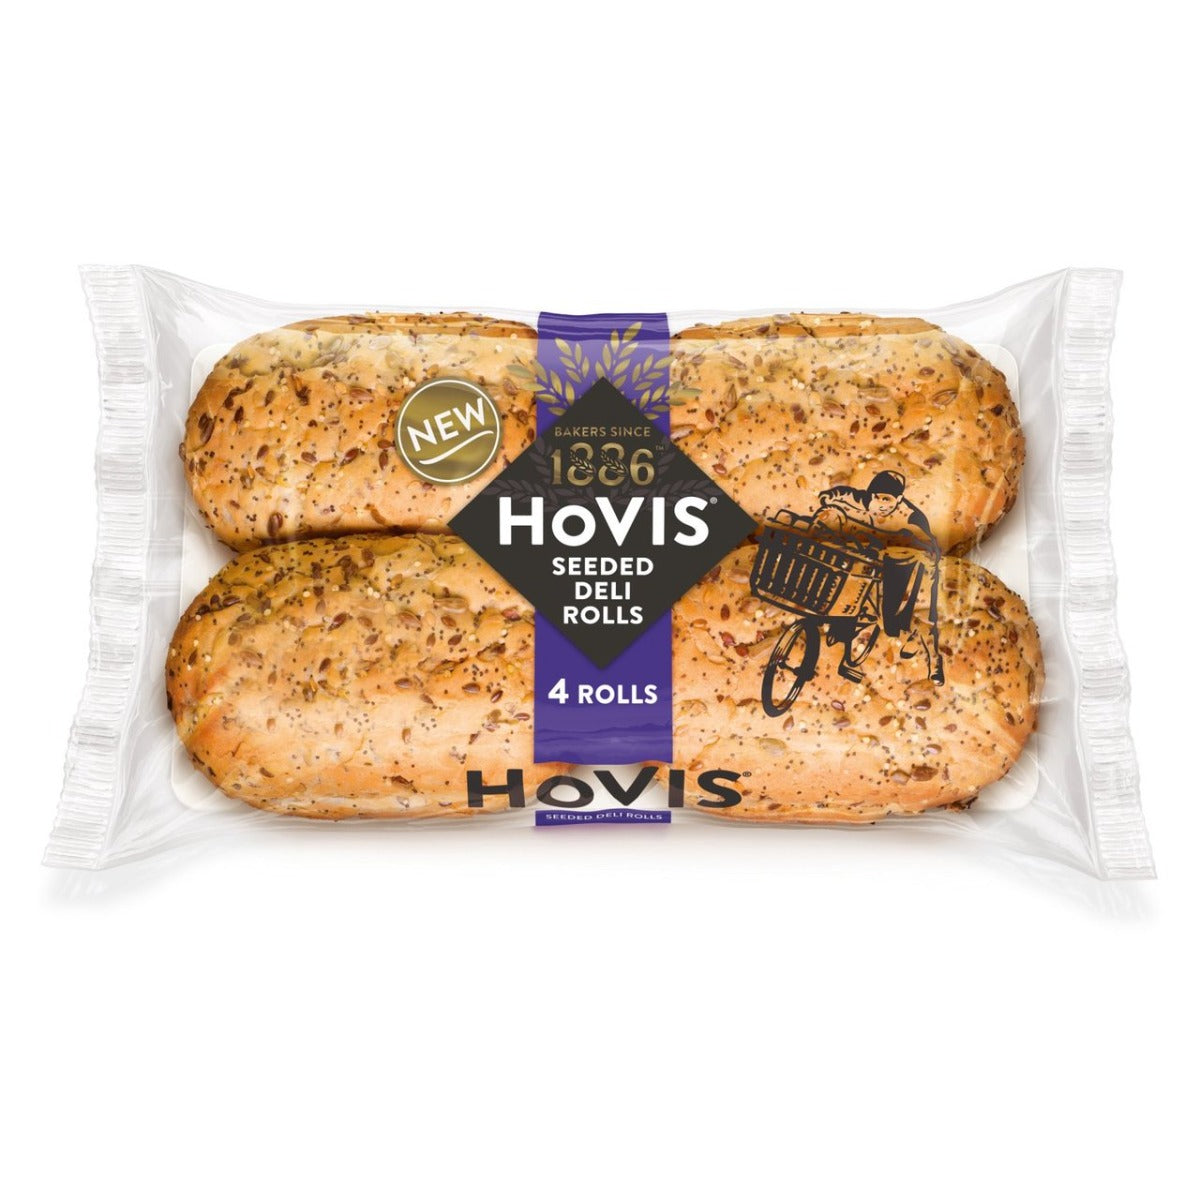 Hovis Seeded Deli Rolls 4 per pack